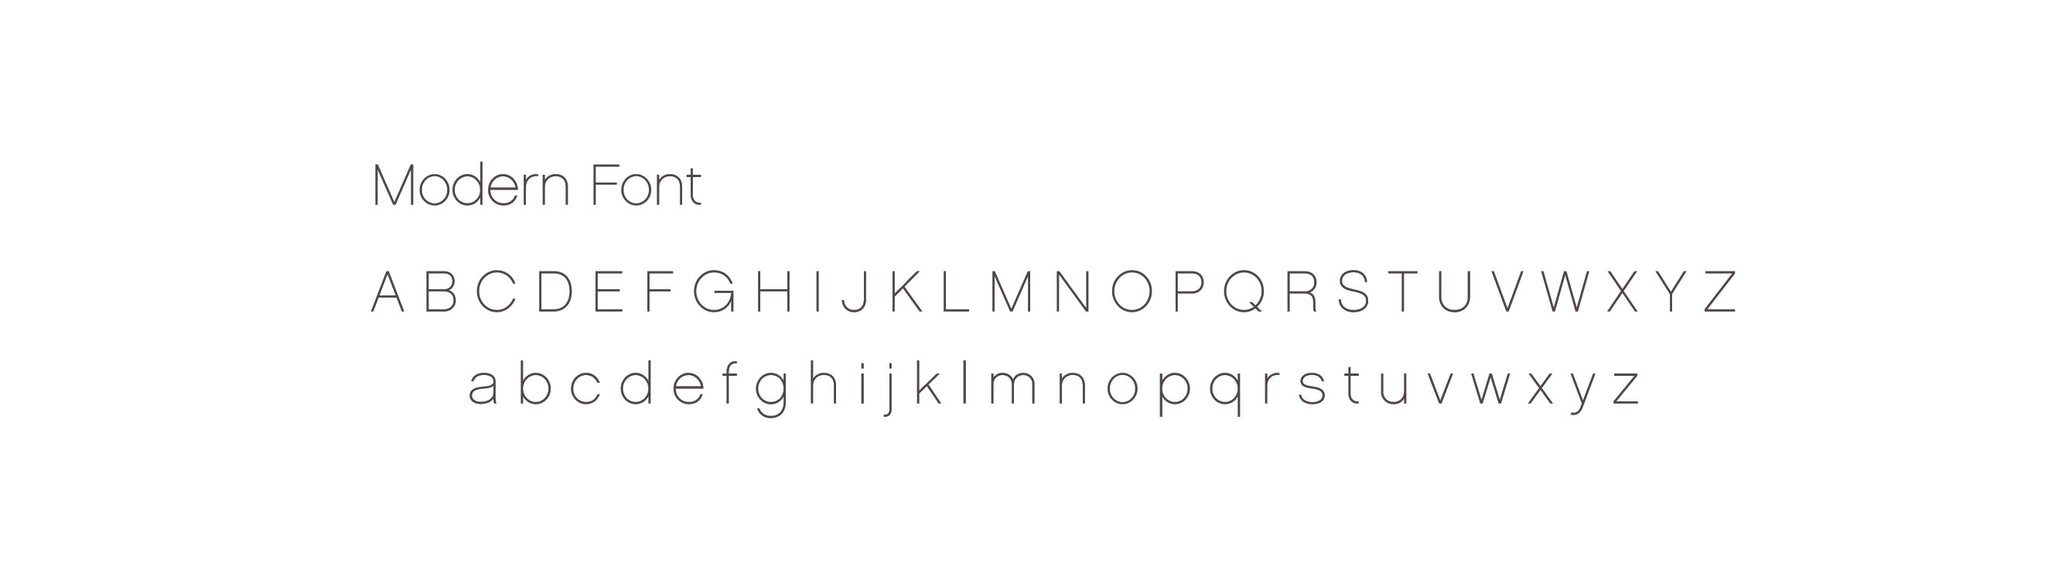 FOTO's Modern Font in available in both upper and lower case letters for the Fotostrap.